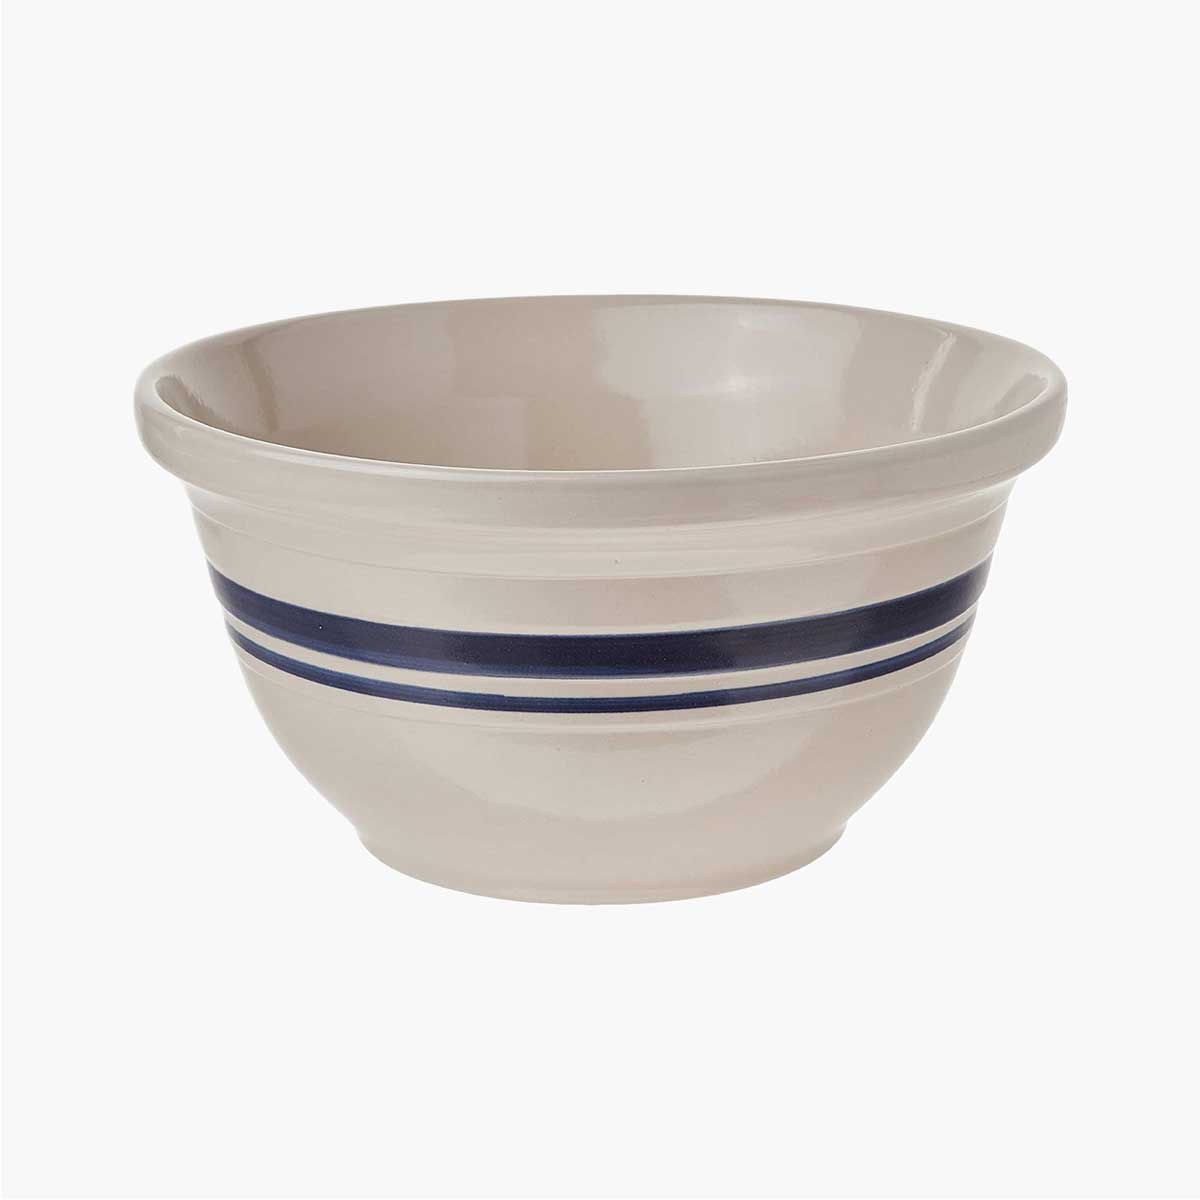 A blue striped large bowl as part of Kate McDermott's favorite kitchen things.